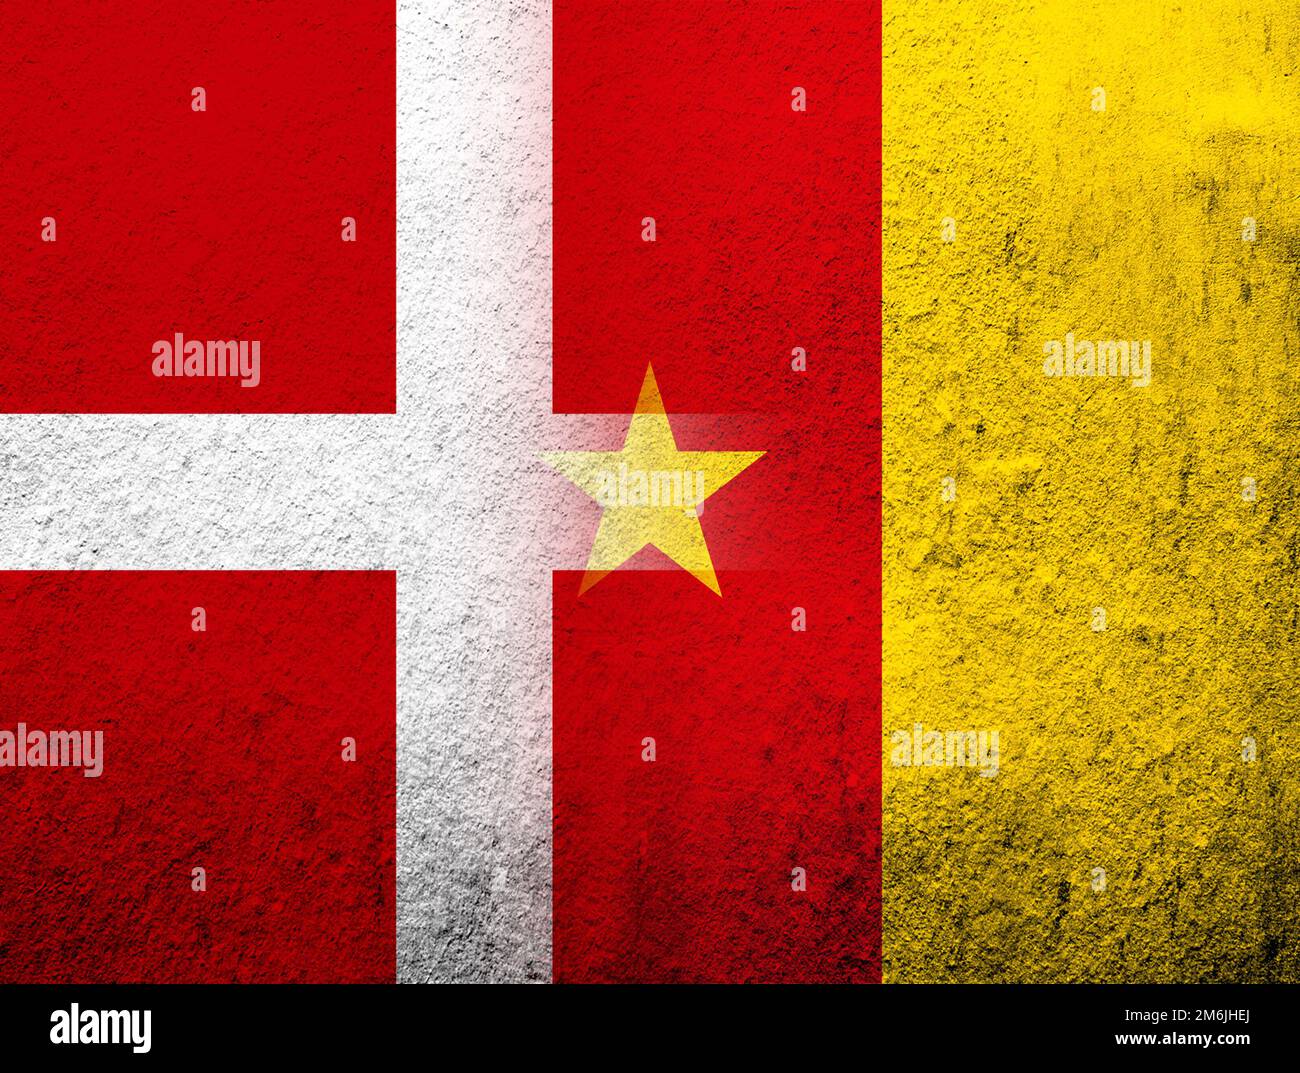 The Kingdom of Denmark National flag with The Republic of Cameroon National flag. Grunge Background Stock Photo